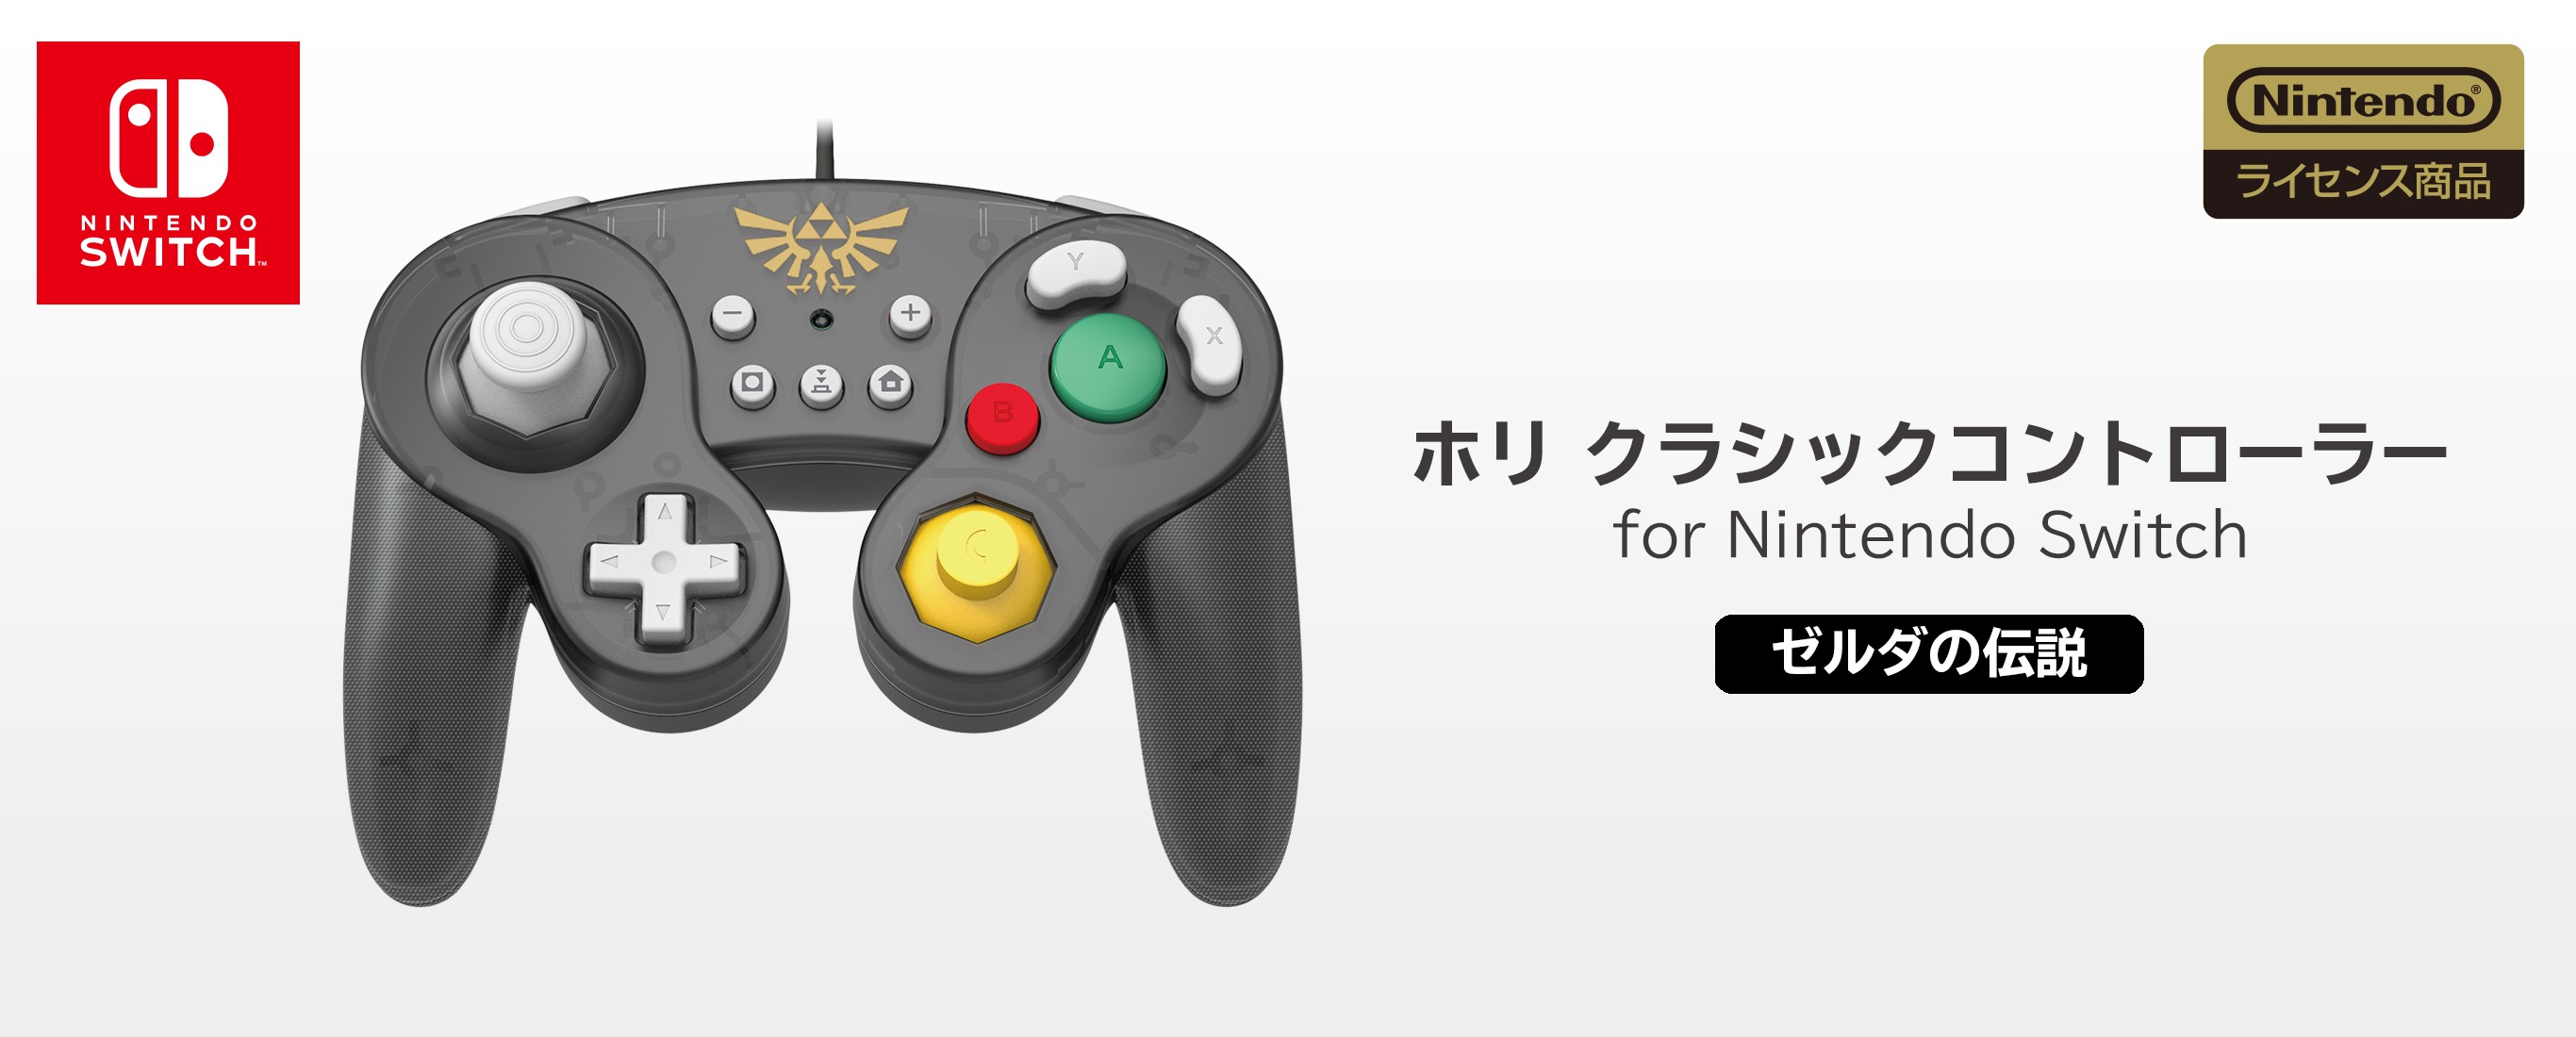 Switch October Controllers For In Nintendo Hori GameCube-Style Classic Siliconera To - Release